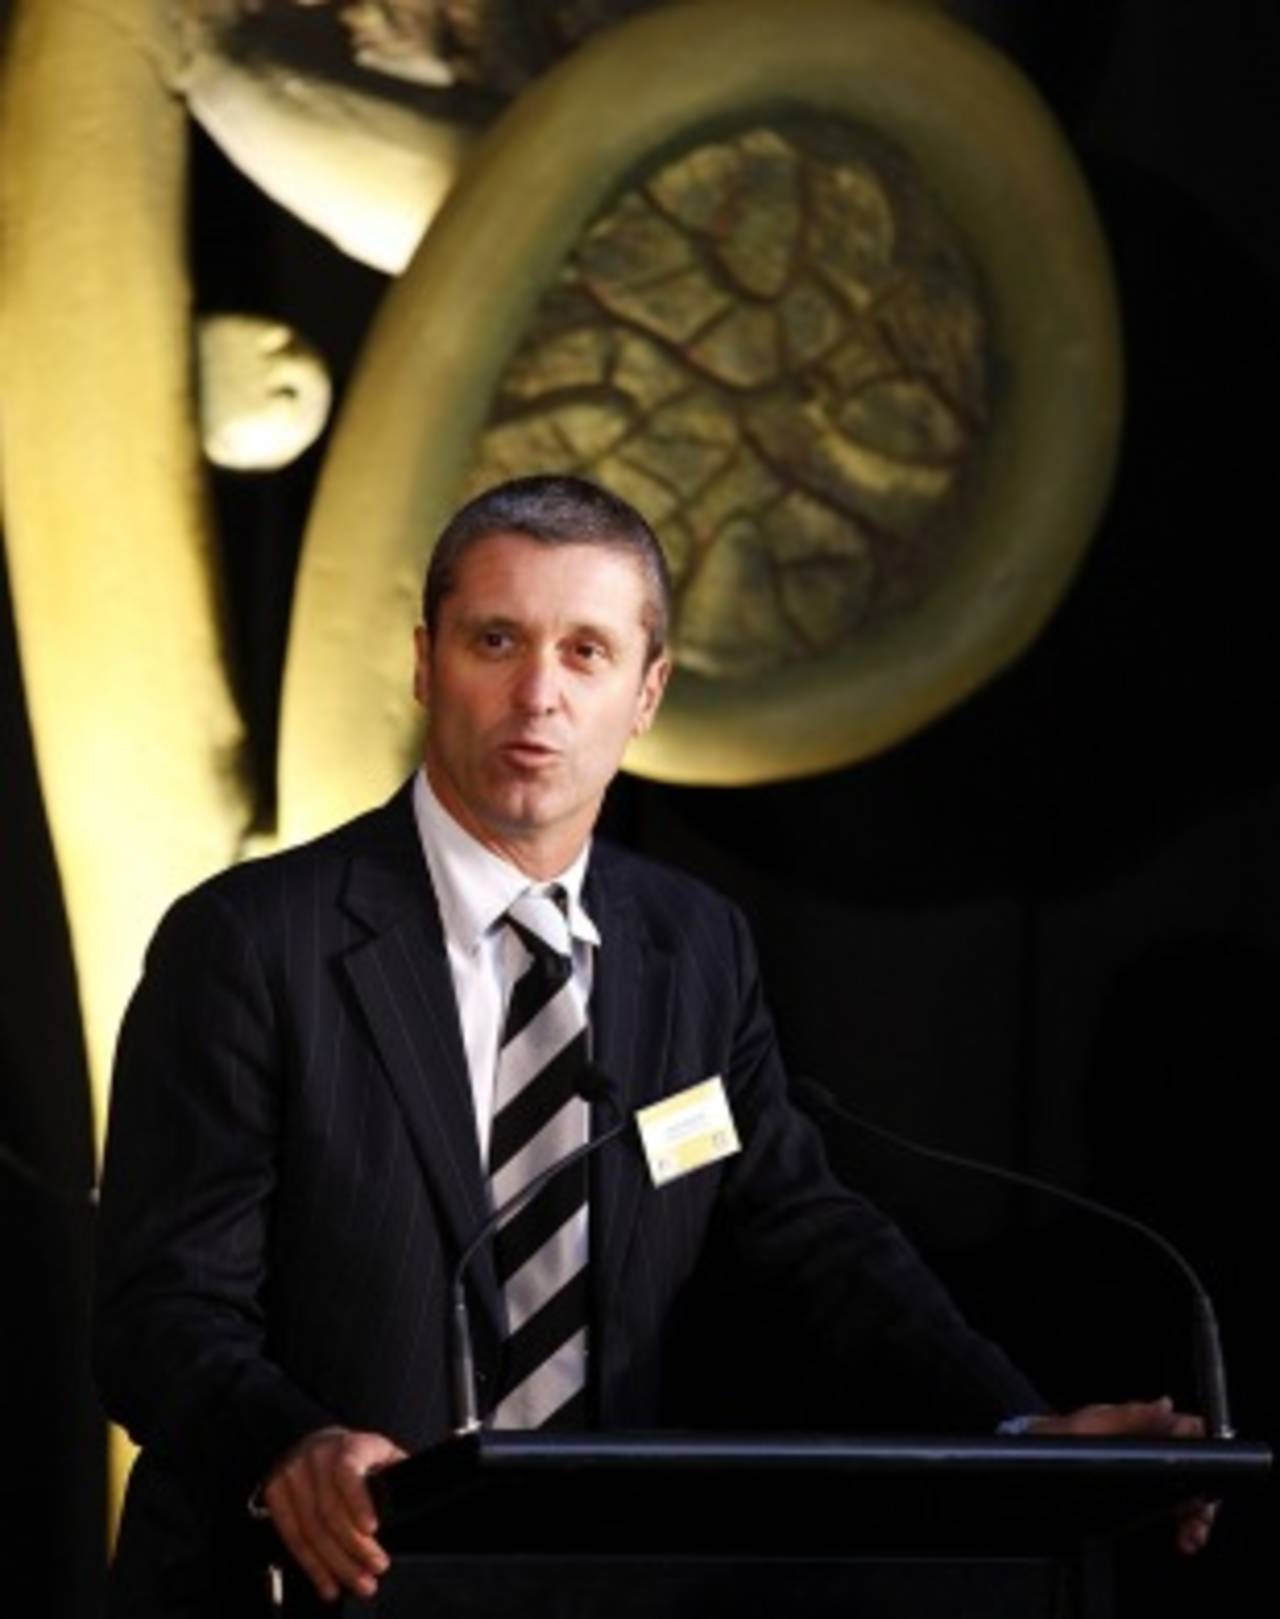 New Zealand Cricket chief executive Justin Vaughan speaks at the launch of the 2010 ICC Under-19 World Cup, Christchurch, January 10, 2010